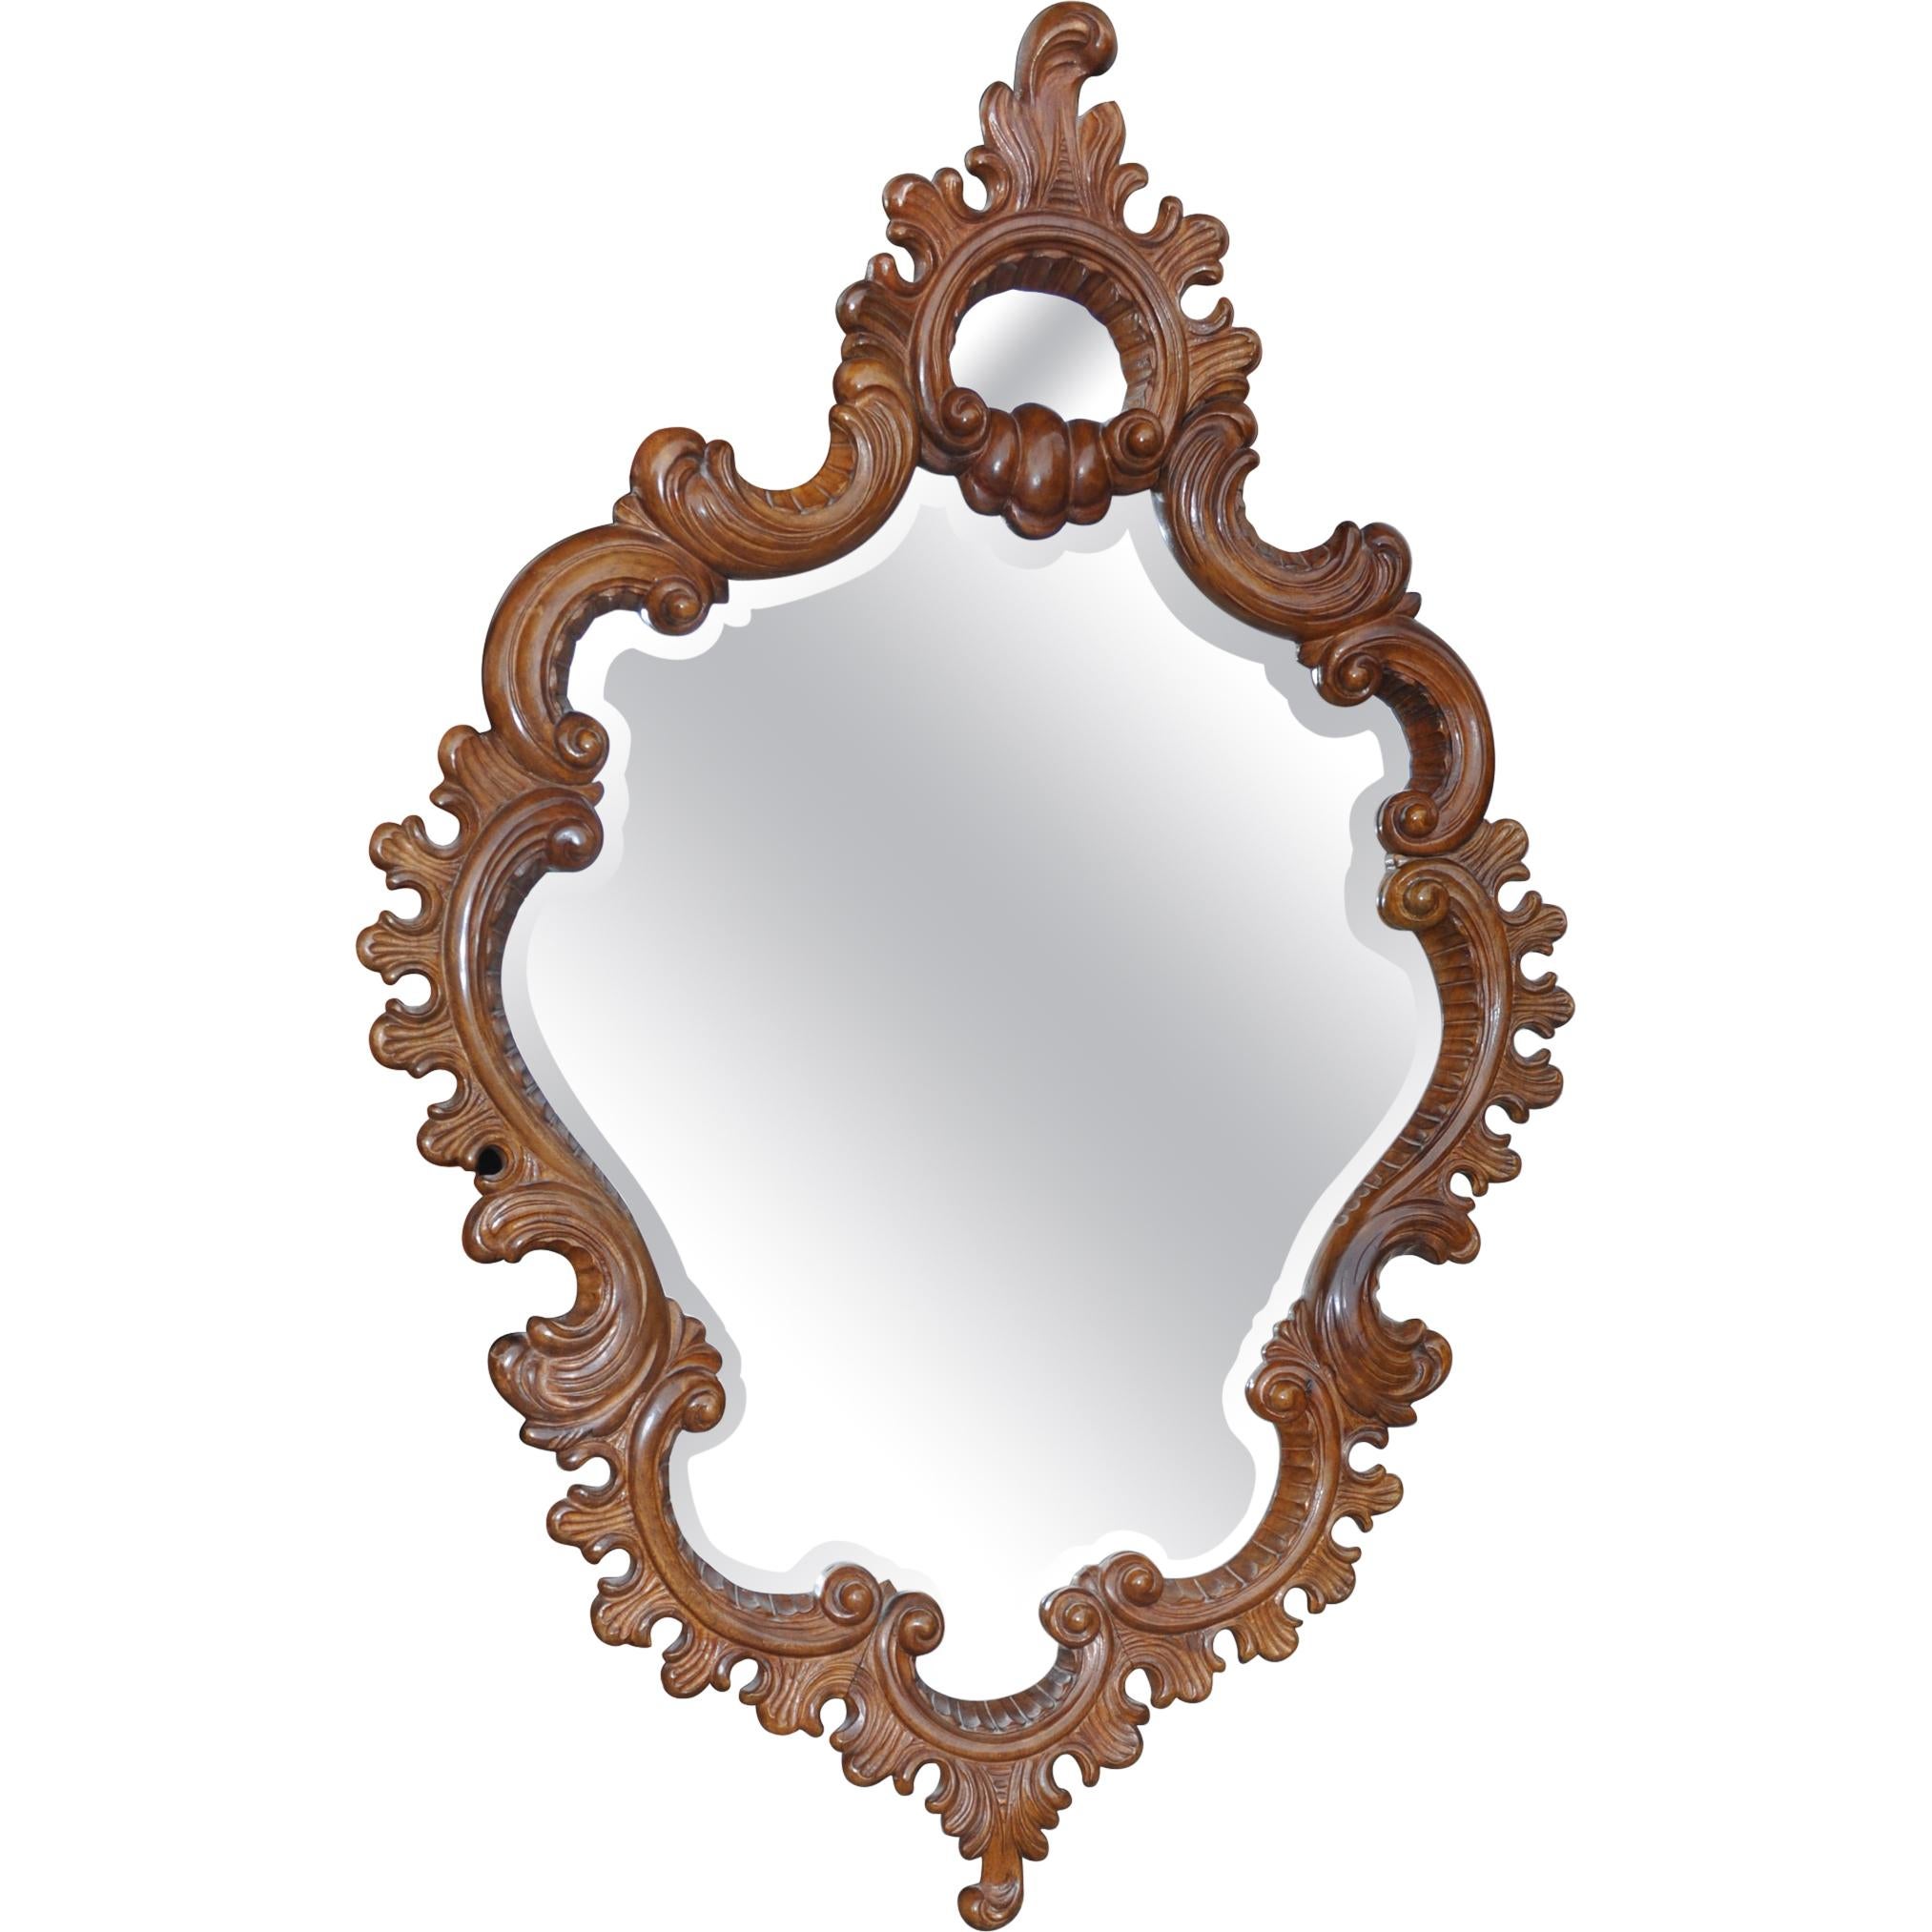 19th Century Richly Decorated Rococo Wall Mirror, circa 1880 For Sale